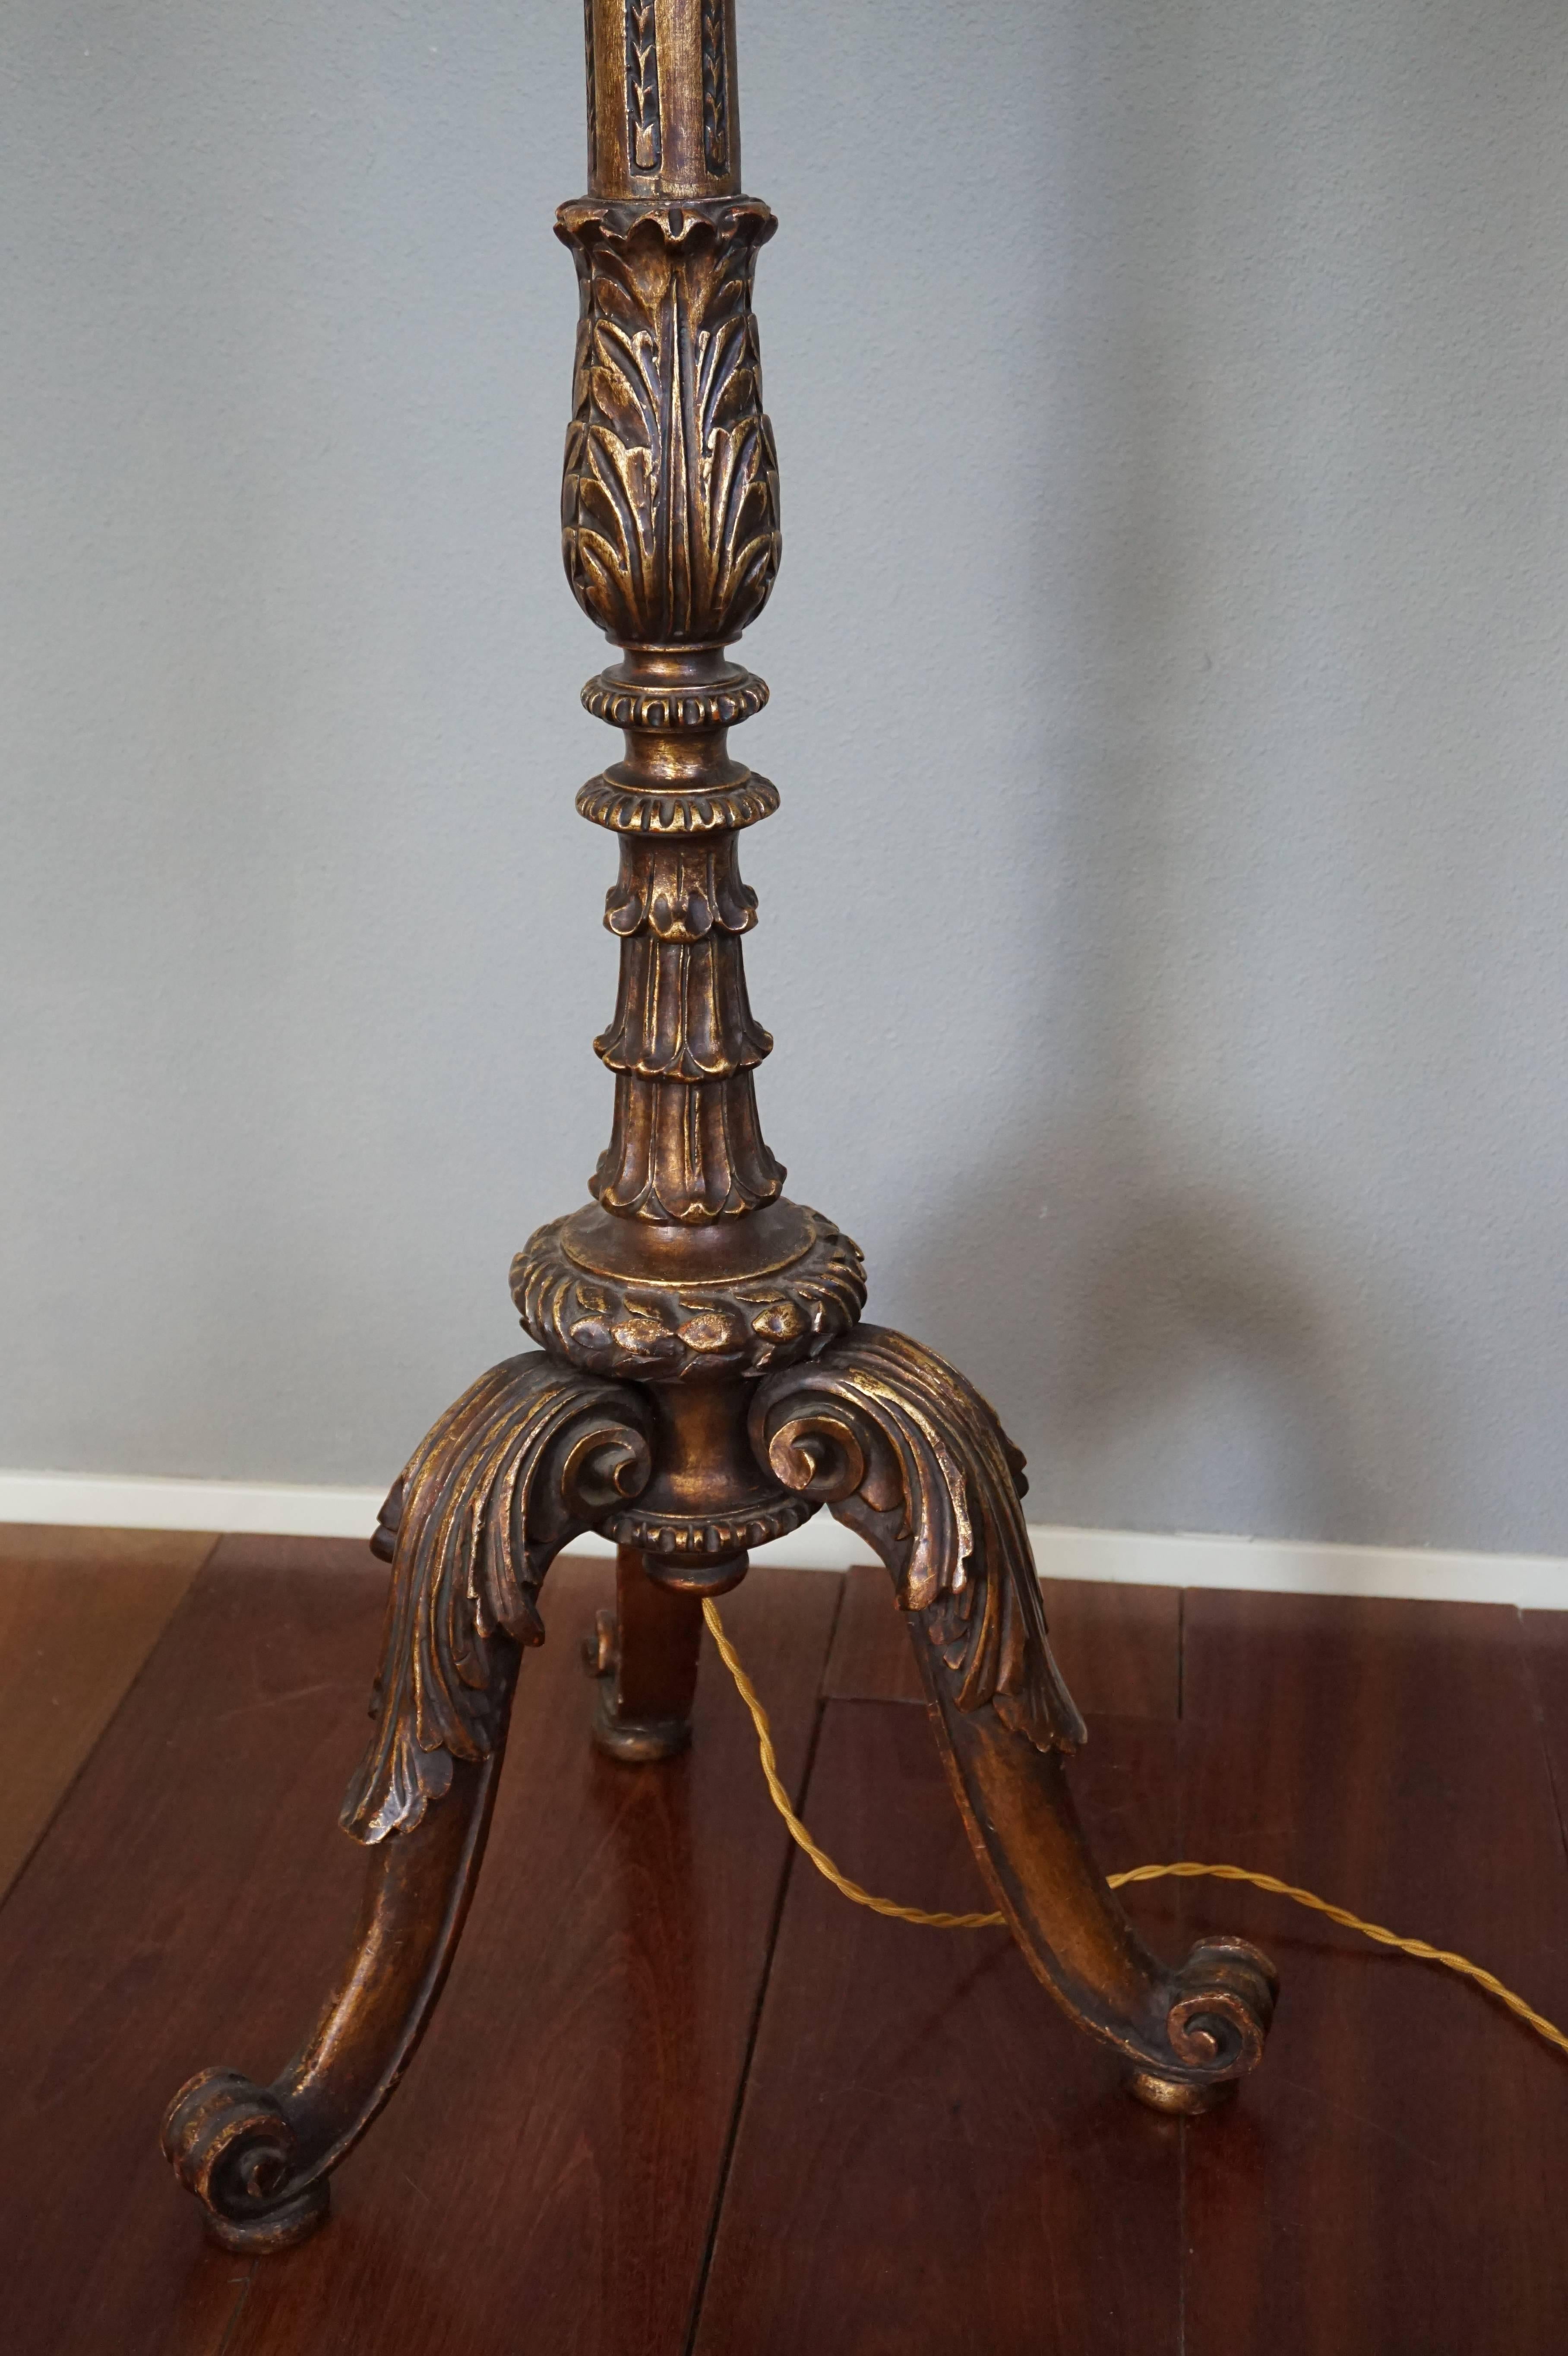 Stunning hand-carved floor lamp.

This beautiful quality and hand carved wooden floor lamp from the early 1900s is in mint condition. The typical Baroque shape and warm patina of this handcrafted lamp are a joy to look at, both with the light